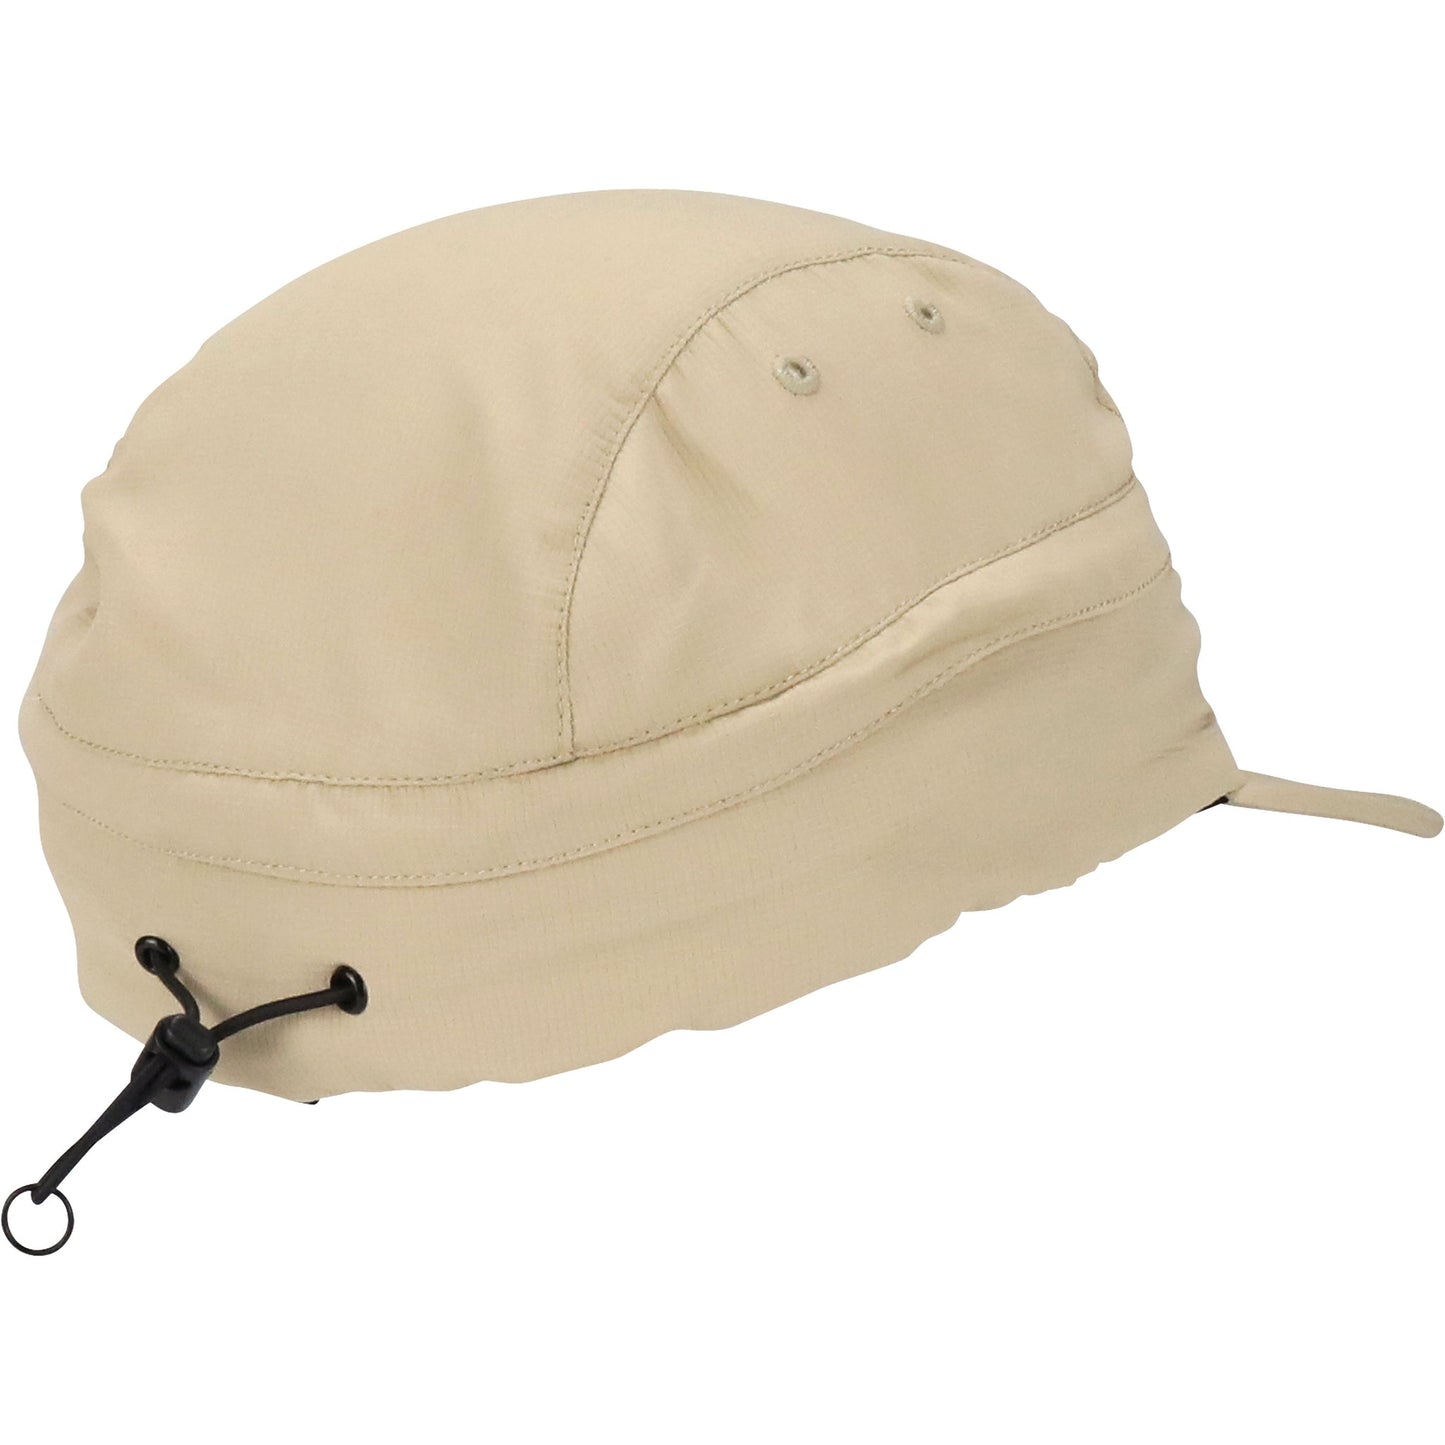 Aftco Fishing Guide Hat - Dogfish Tackle & Marine